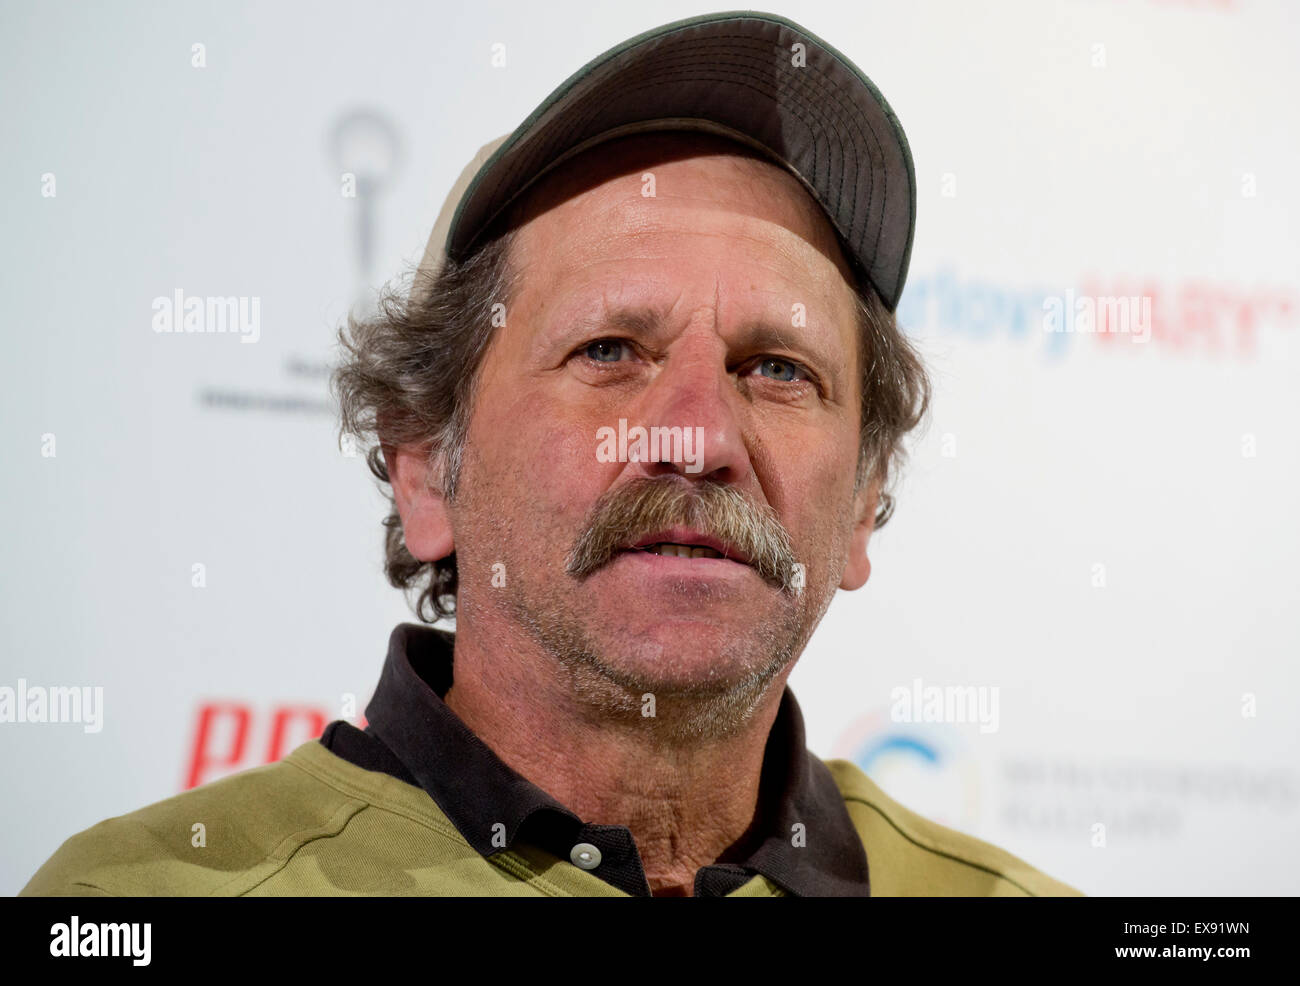 Karlovy Vary, Czech Republic. 9th July, 2015. Actor Bob Tarasuk arrived at the 50th International Film Festival to present the American film Bob and the Trees by director Diego Ongaro in Karlovy Vary, Czech Republic, July 9, 2015. Credit:  Vit Simanek/CTK Photo/Alamy Live News Stock Photo